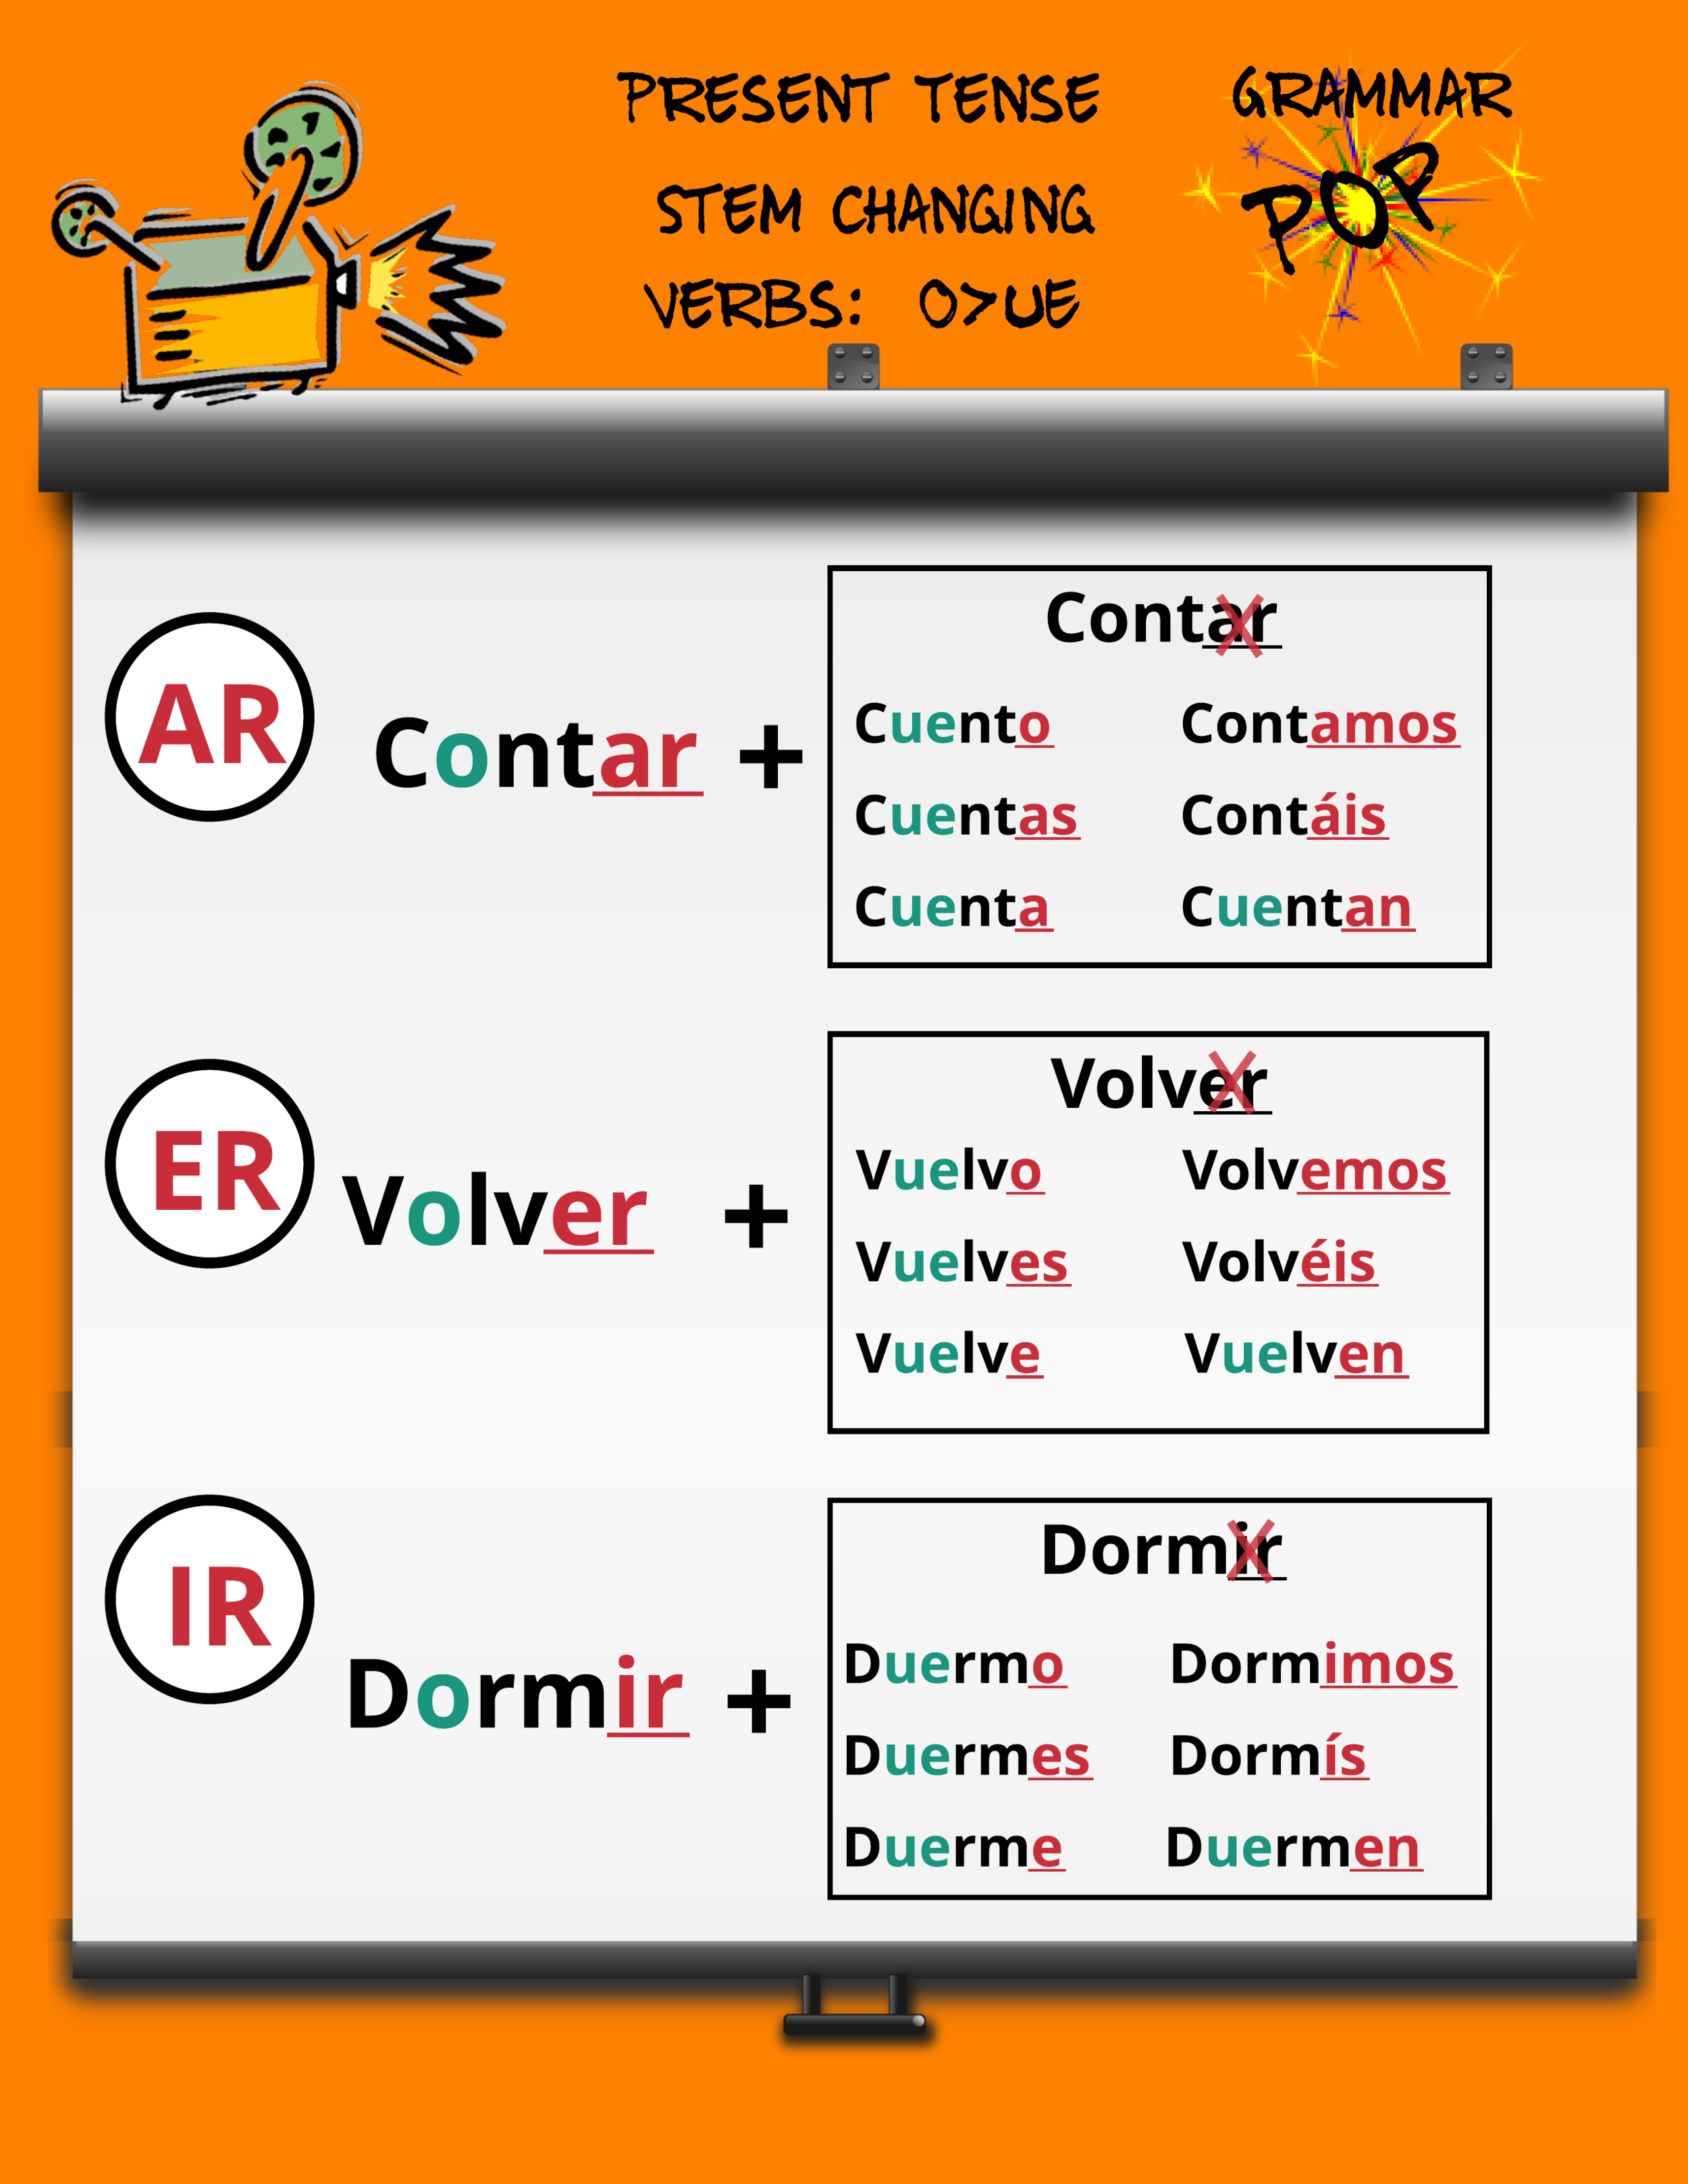 list-of-stem-changing-verbs-in-spanish-150-verbs